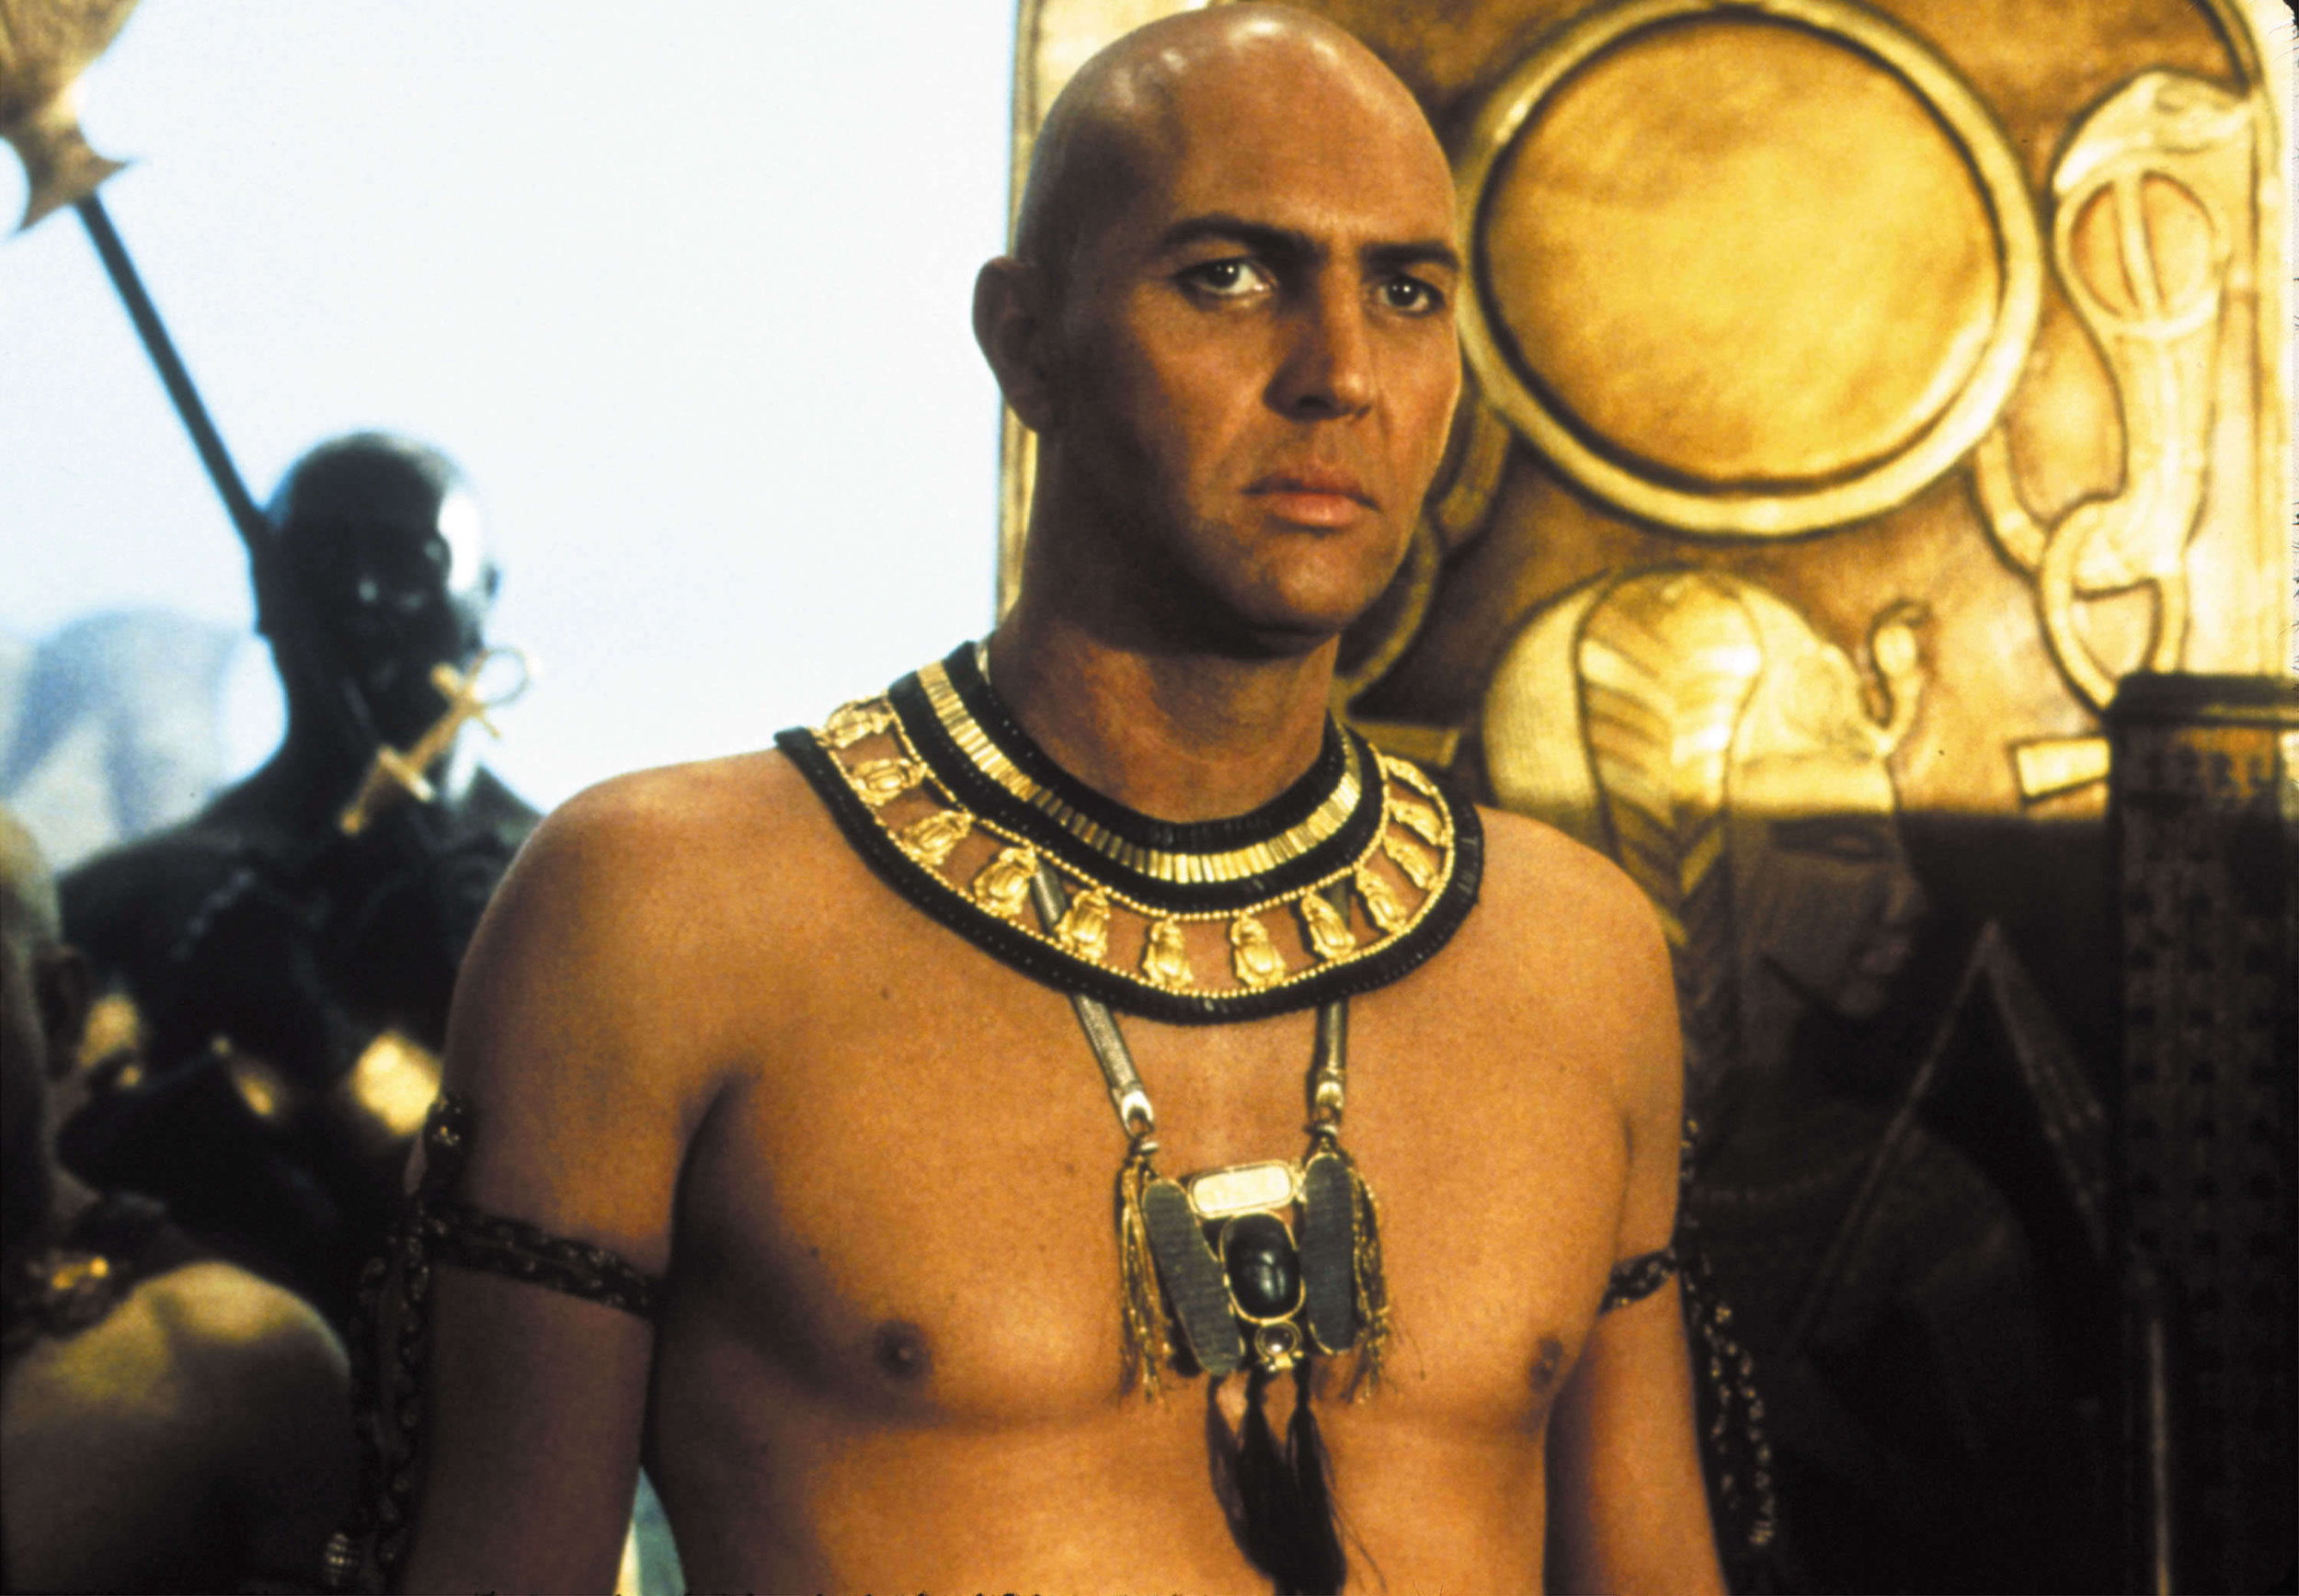 <p>Arnold Vosloo came into his audition for the part of Imhotep, a.k.a. the mummy, with a clear vision in mind. He decided to play it straight, and considered it a tragic love story from Imhotep’s perspective. It must have worked, as Vosloo was offered the role after his first audition.</p><p><a href='https://www.msn.com/en-us/community/channel/vid-cj9pqbr0vn9in2b6ddcd8sfgpfq6x6utp44fssrv6mc2gtybw0us'>Follow us on MSN to see more of our exclusive entertainment content.</a></p>